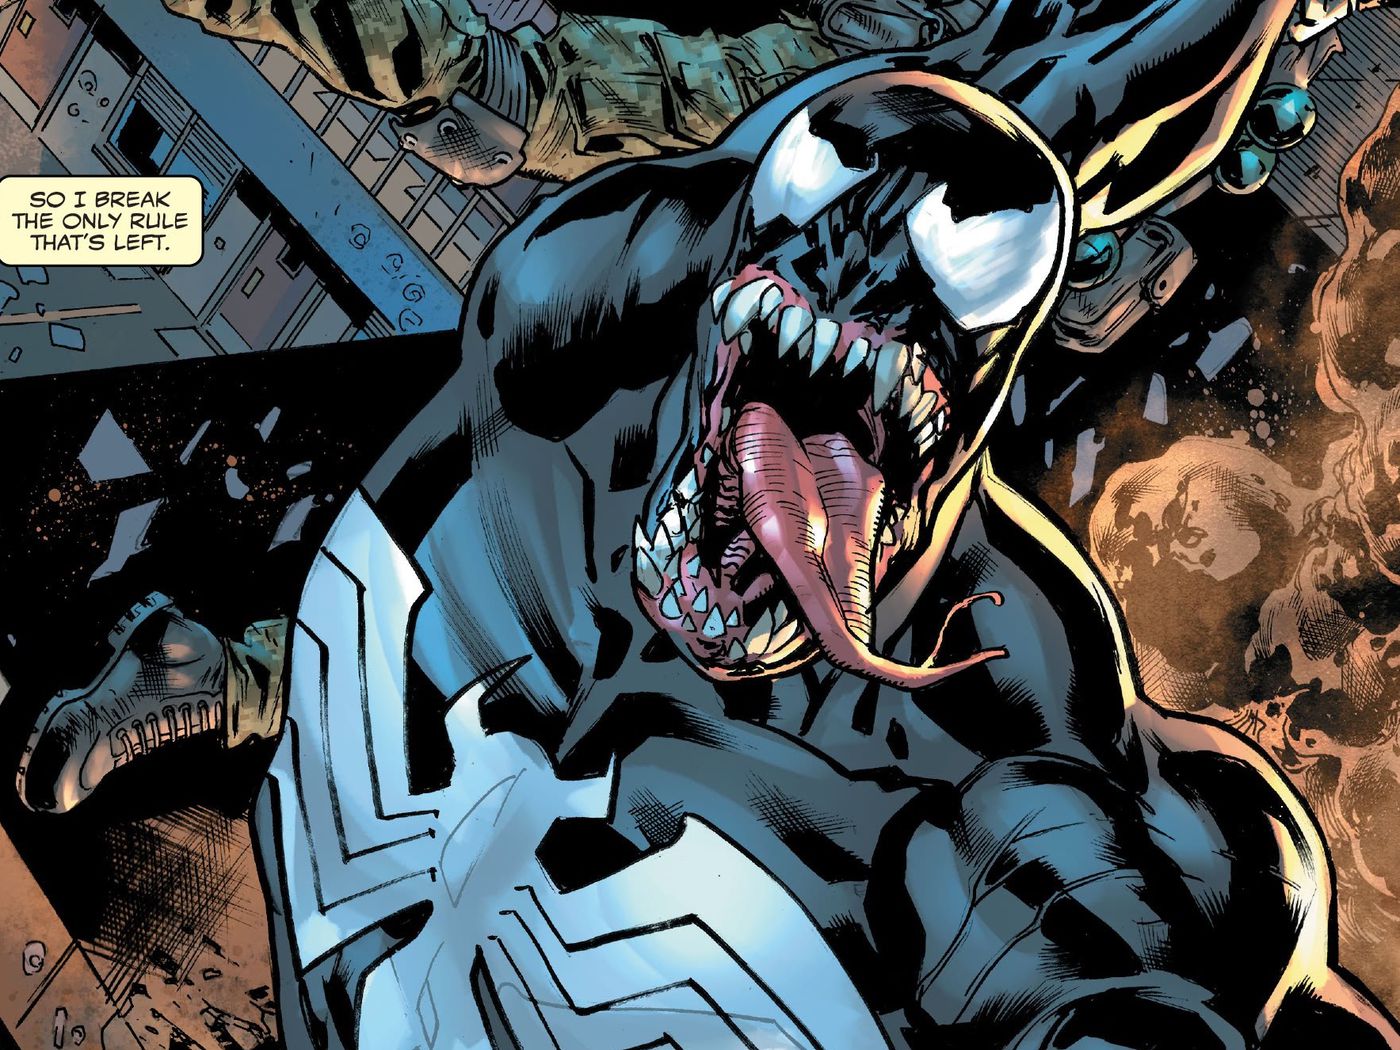 Venom Re S A God Now And It Almost Too Much For